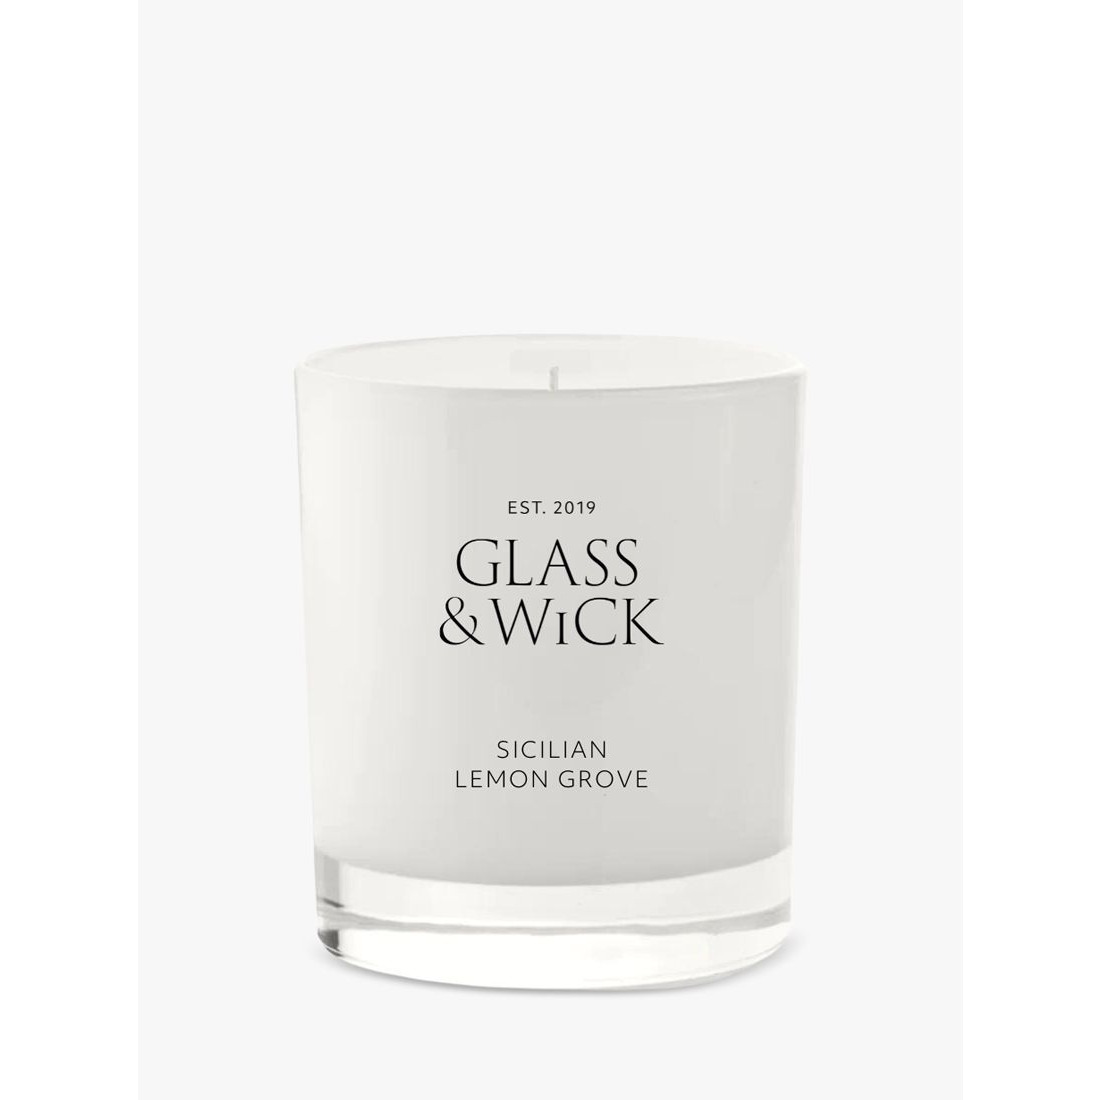 Glass & Wick Sicilian Lemon Grove Scented Candle, 220g - image 1